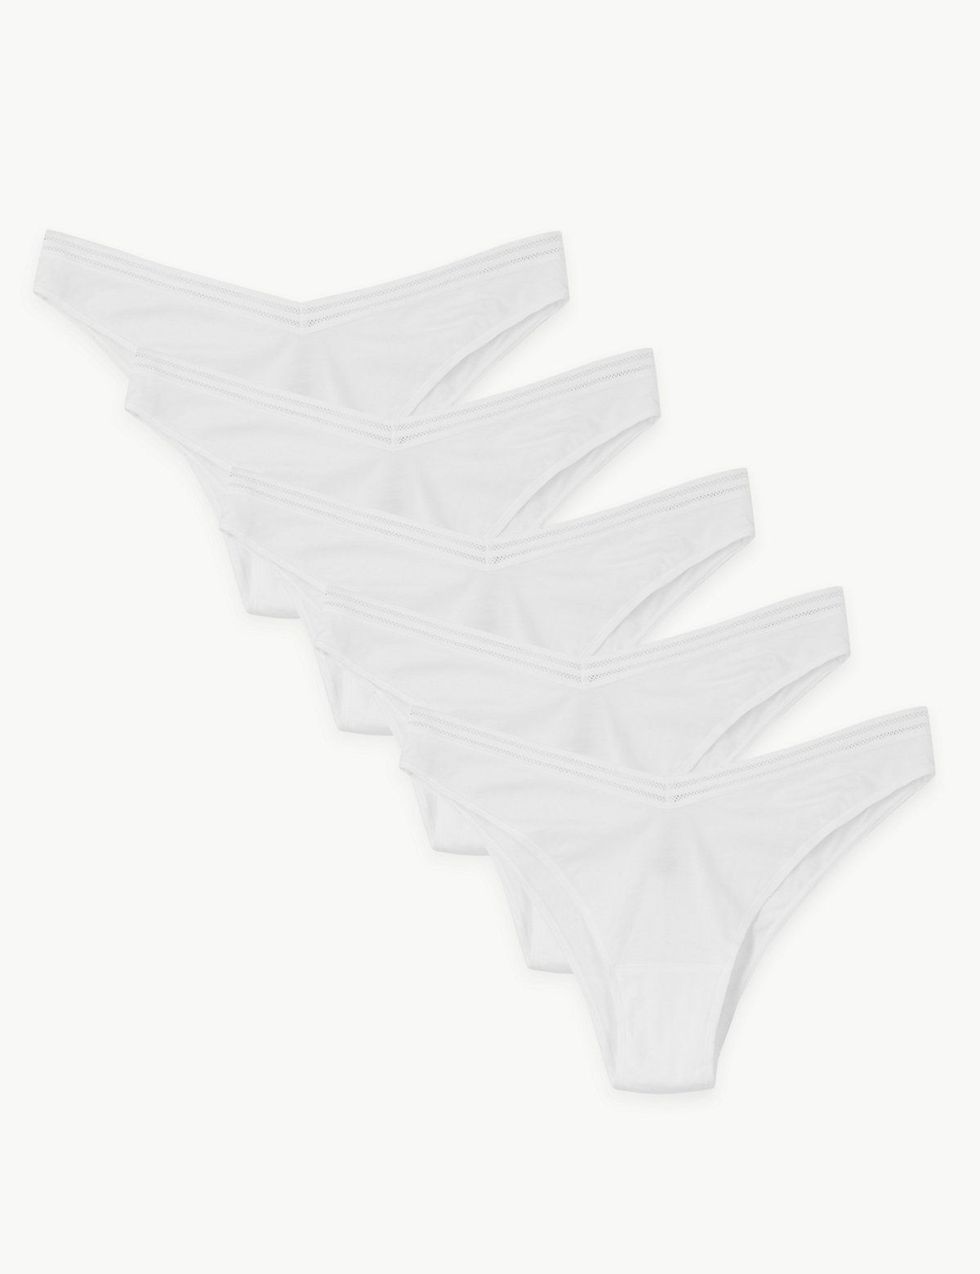 Buy Marks & Spencer Pack of 5 Cotton Mix Slim Fit Knickers